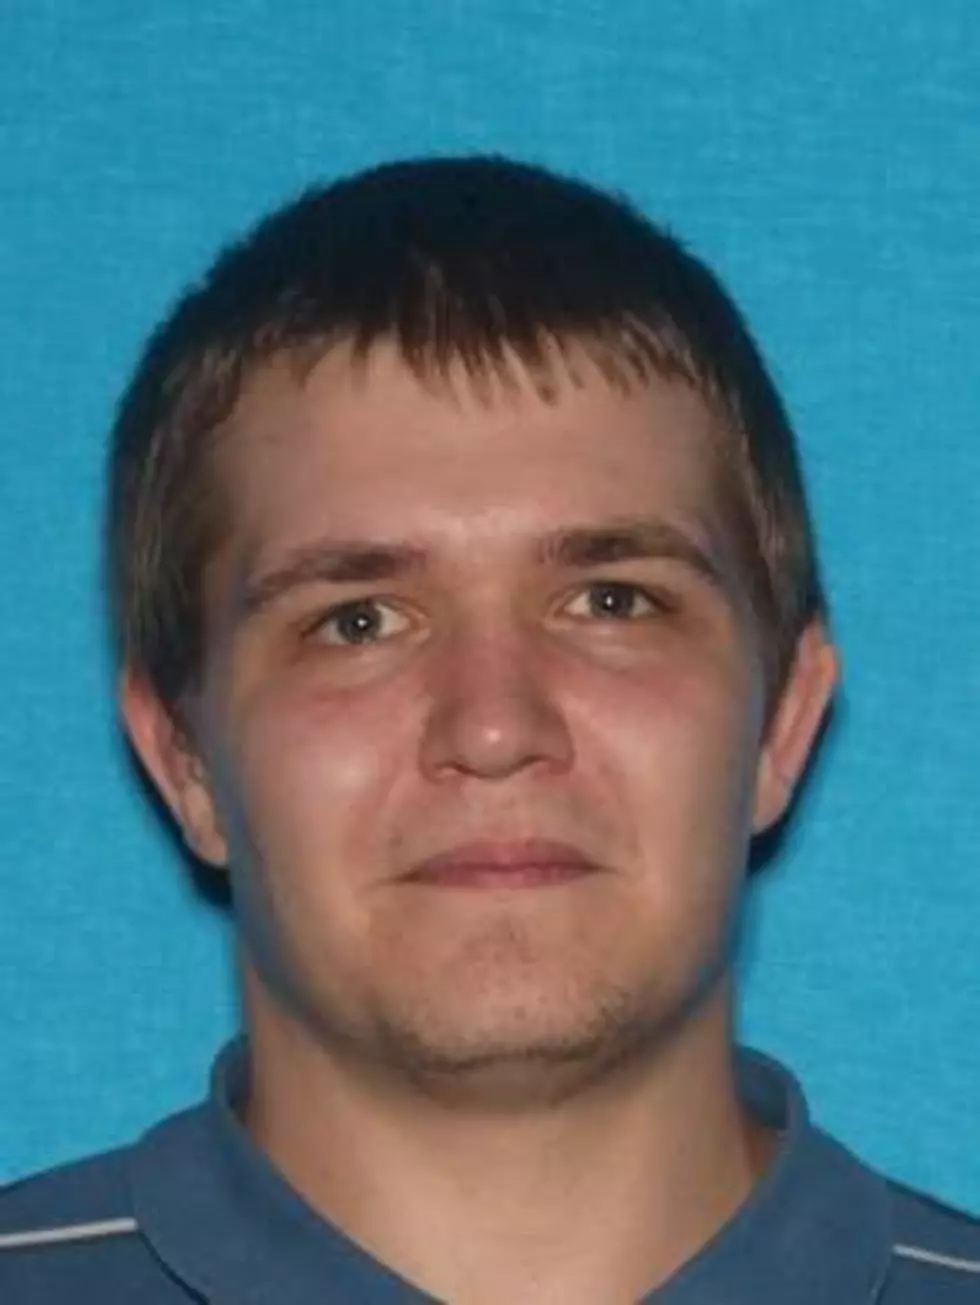 Investigation Continues into Missing Hannibal Man